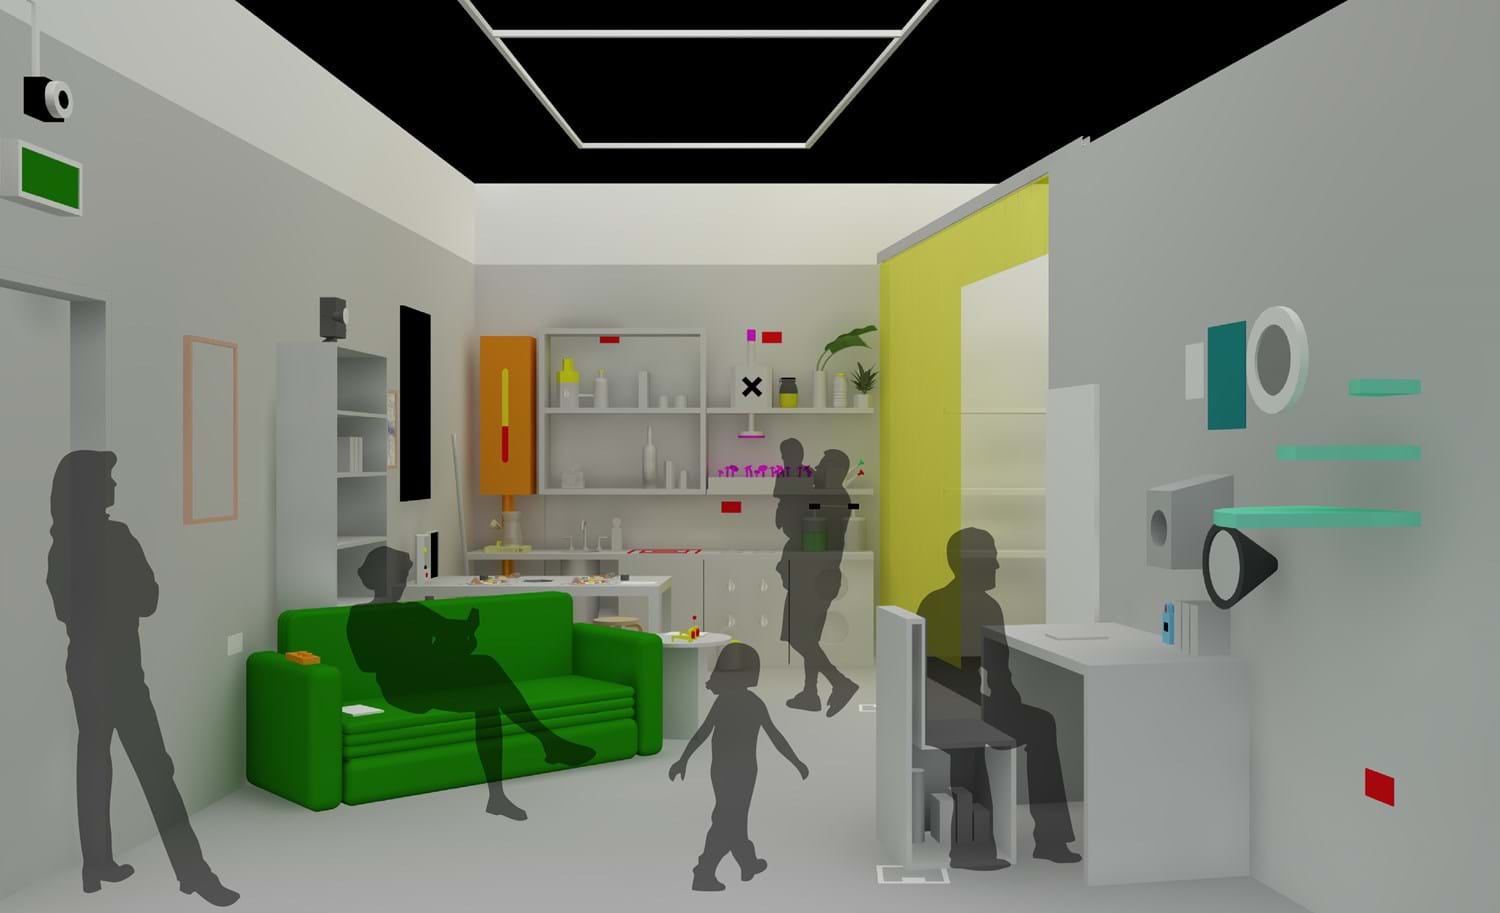 A digital rendering and visualisation of the Future room, featuring figures in a modern minimalistic room with a green sofa and technology on the walls